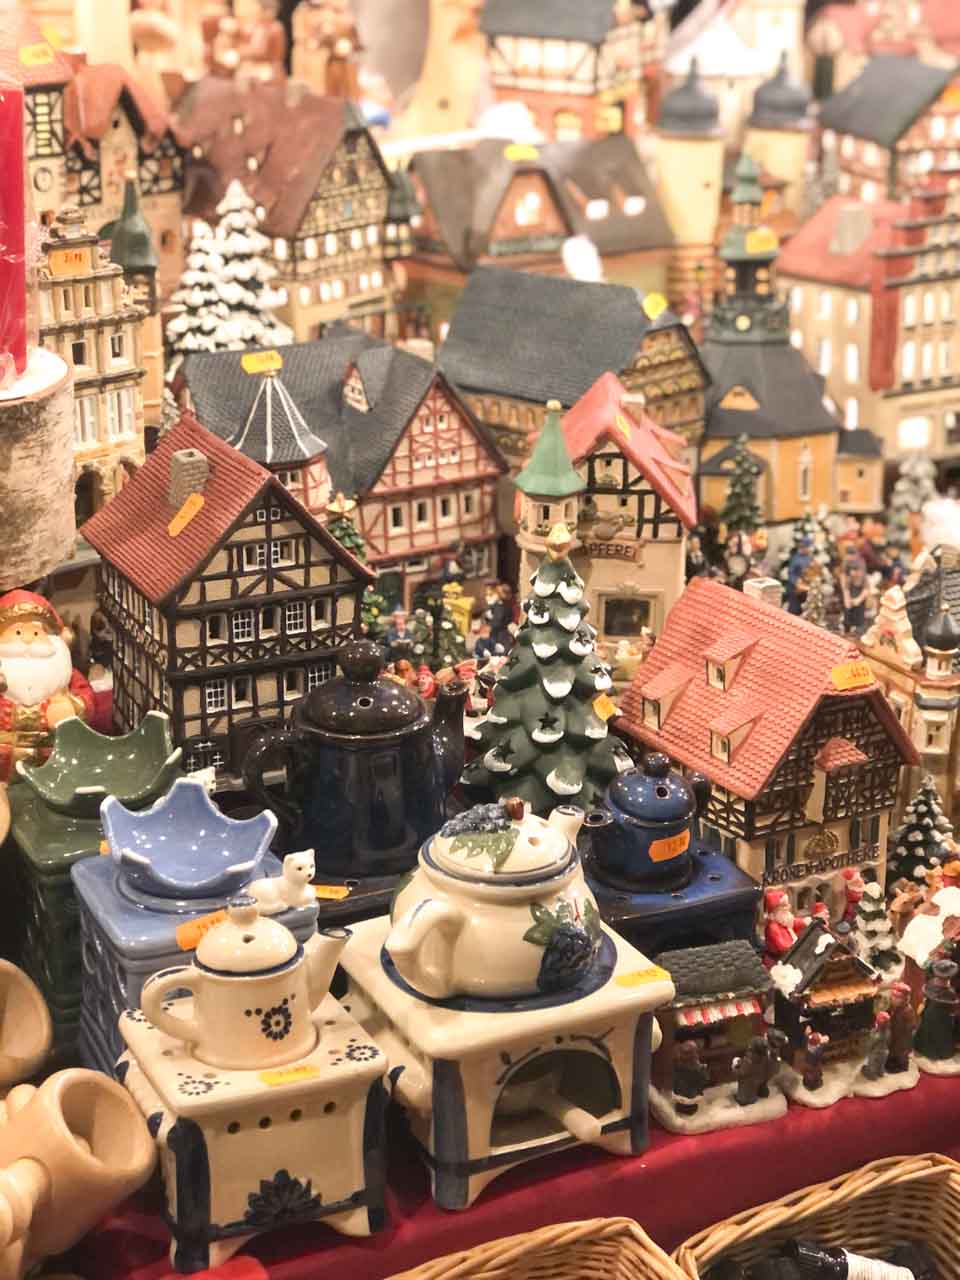 A detailed miniature Christmas village display, complete with tiny houses, a snow-covered tree, and festive figurines, at a Nuremberg Christmas Market stall